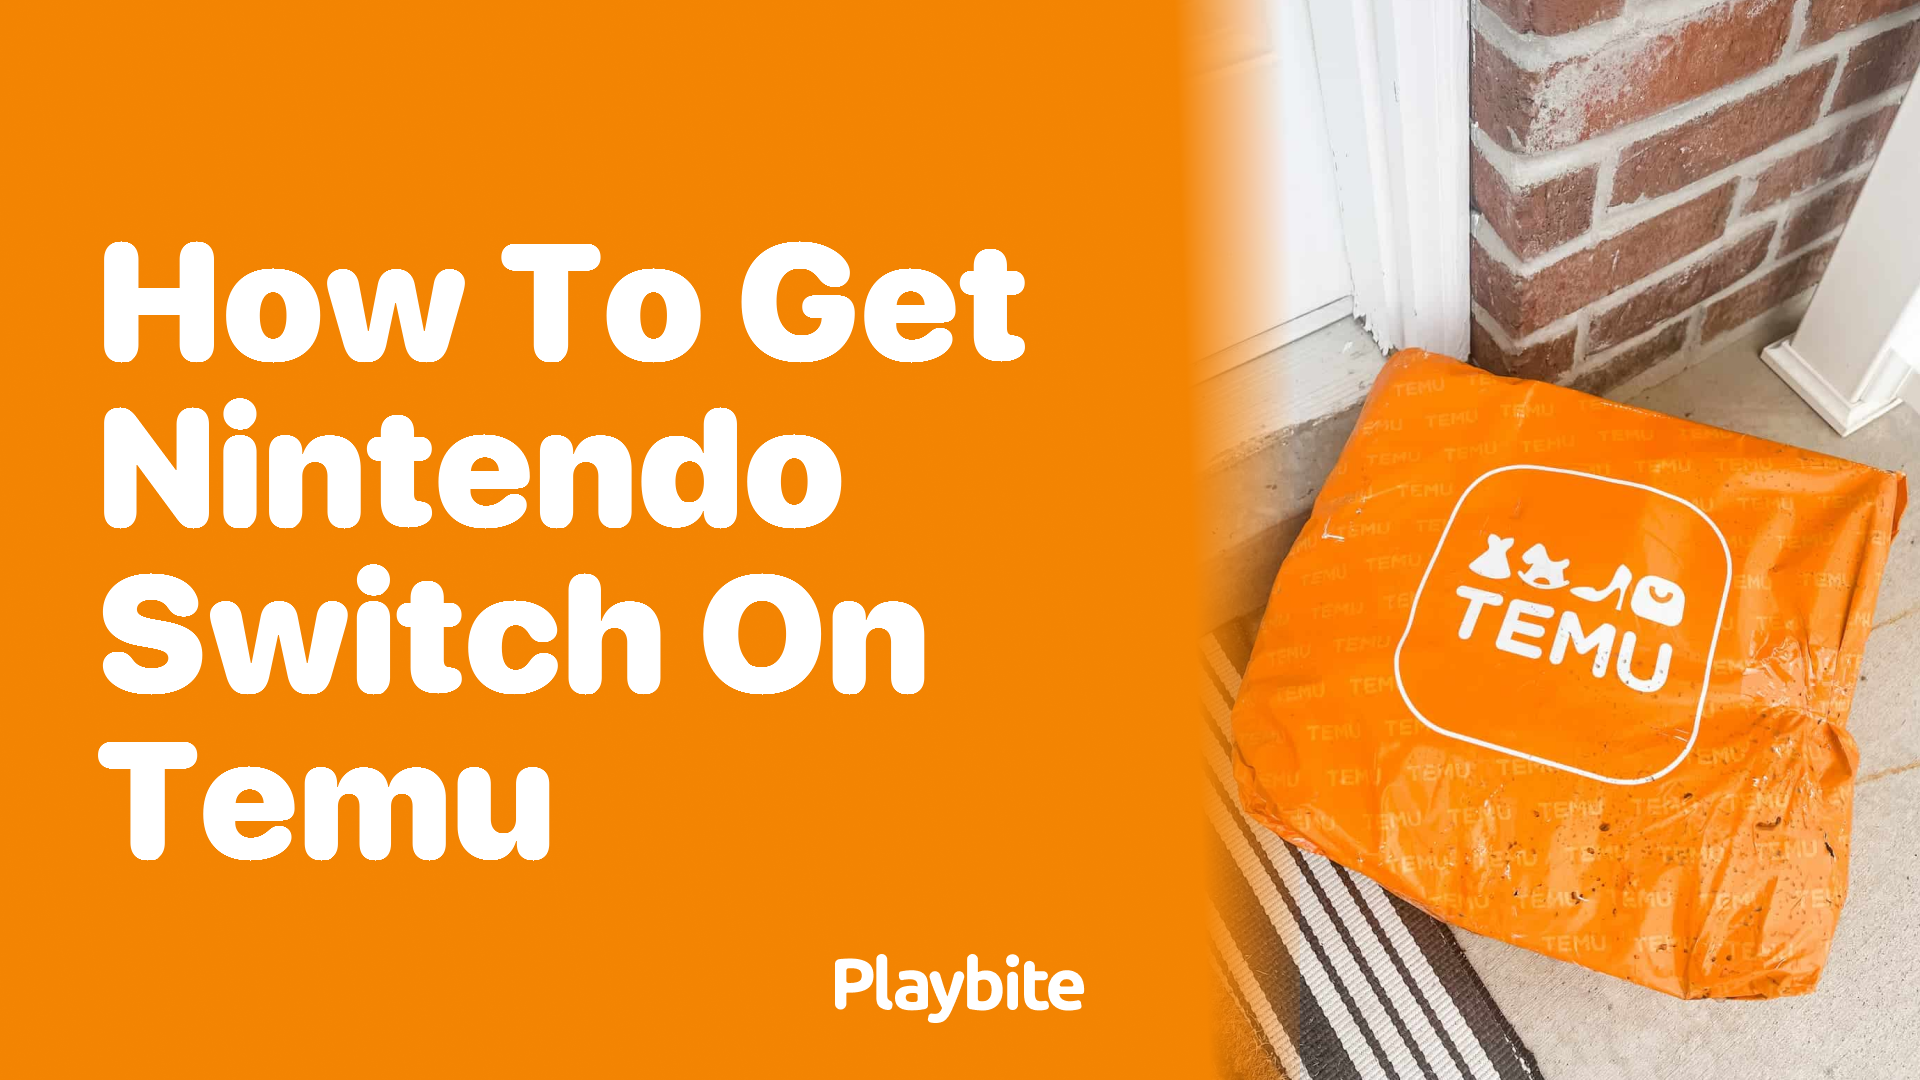 How to Get a Nintendo Switch on Temu